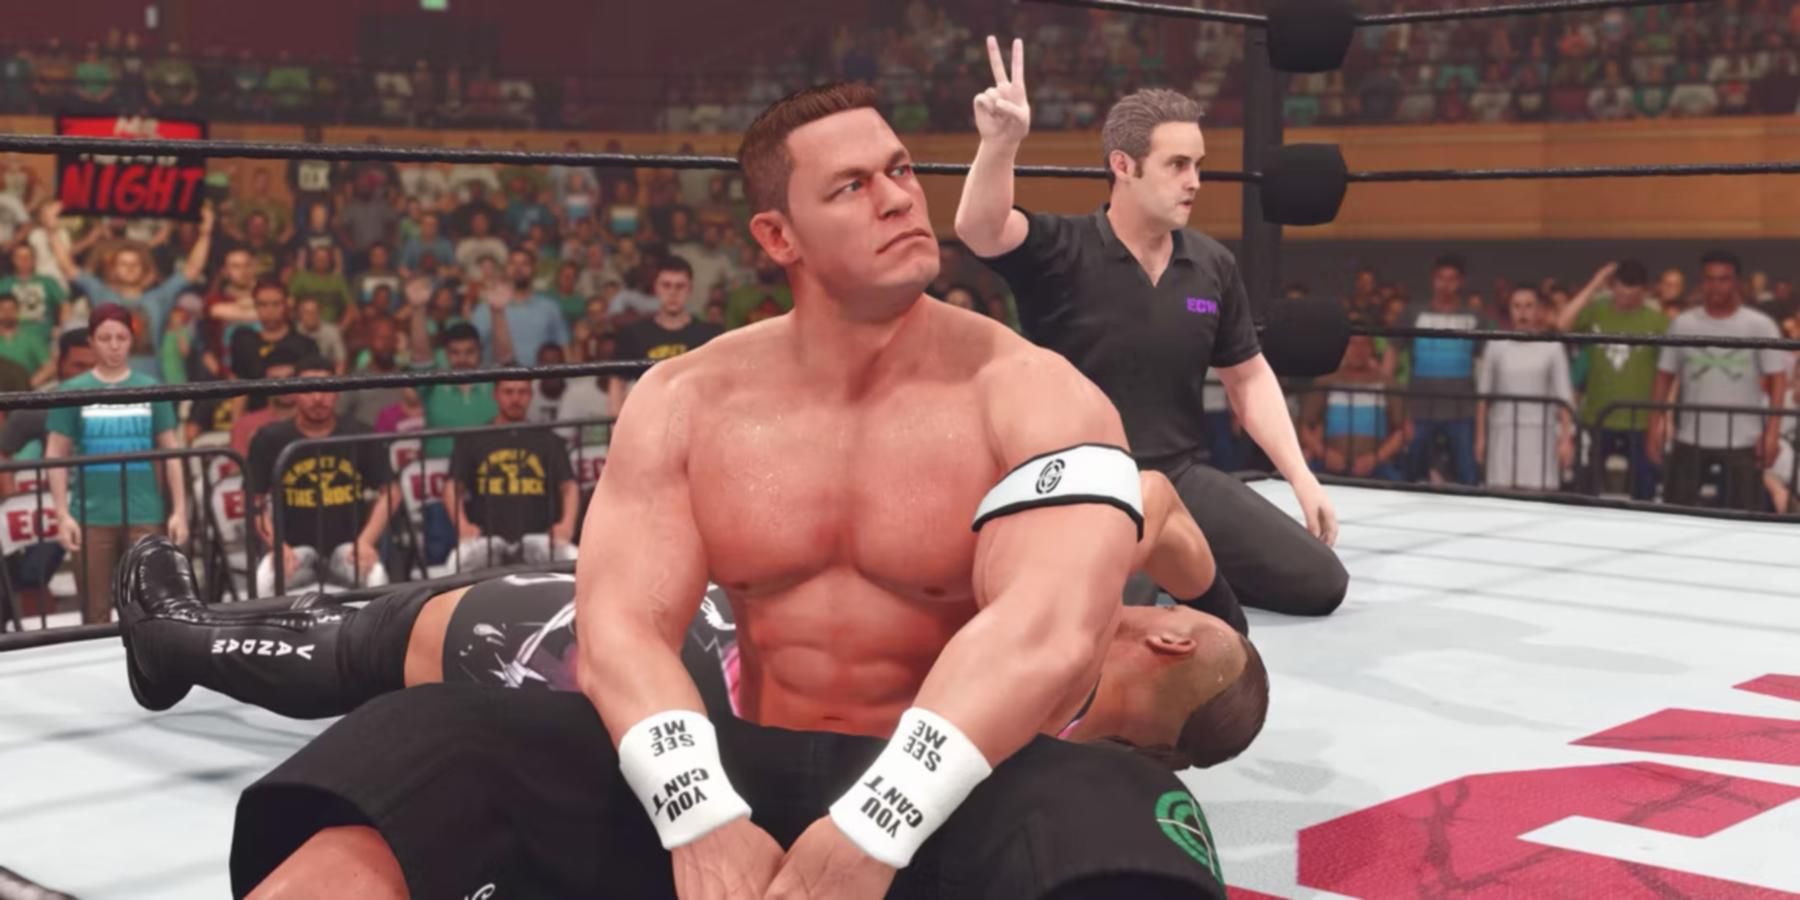 WWE-2K23 John Cena getting a Two Count